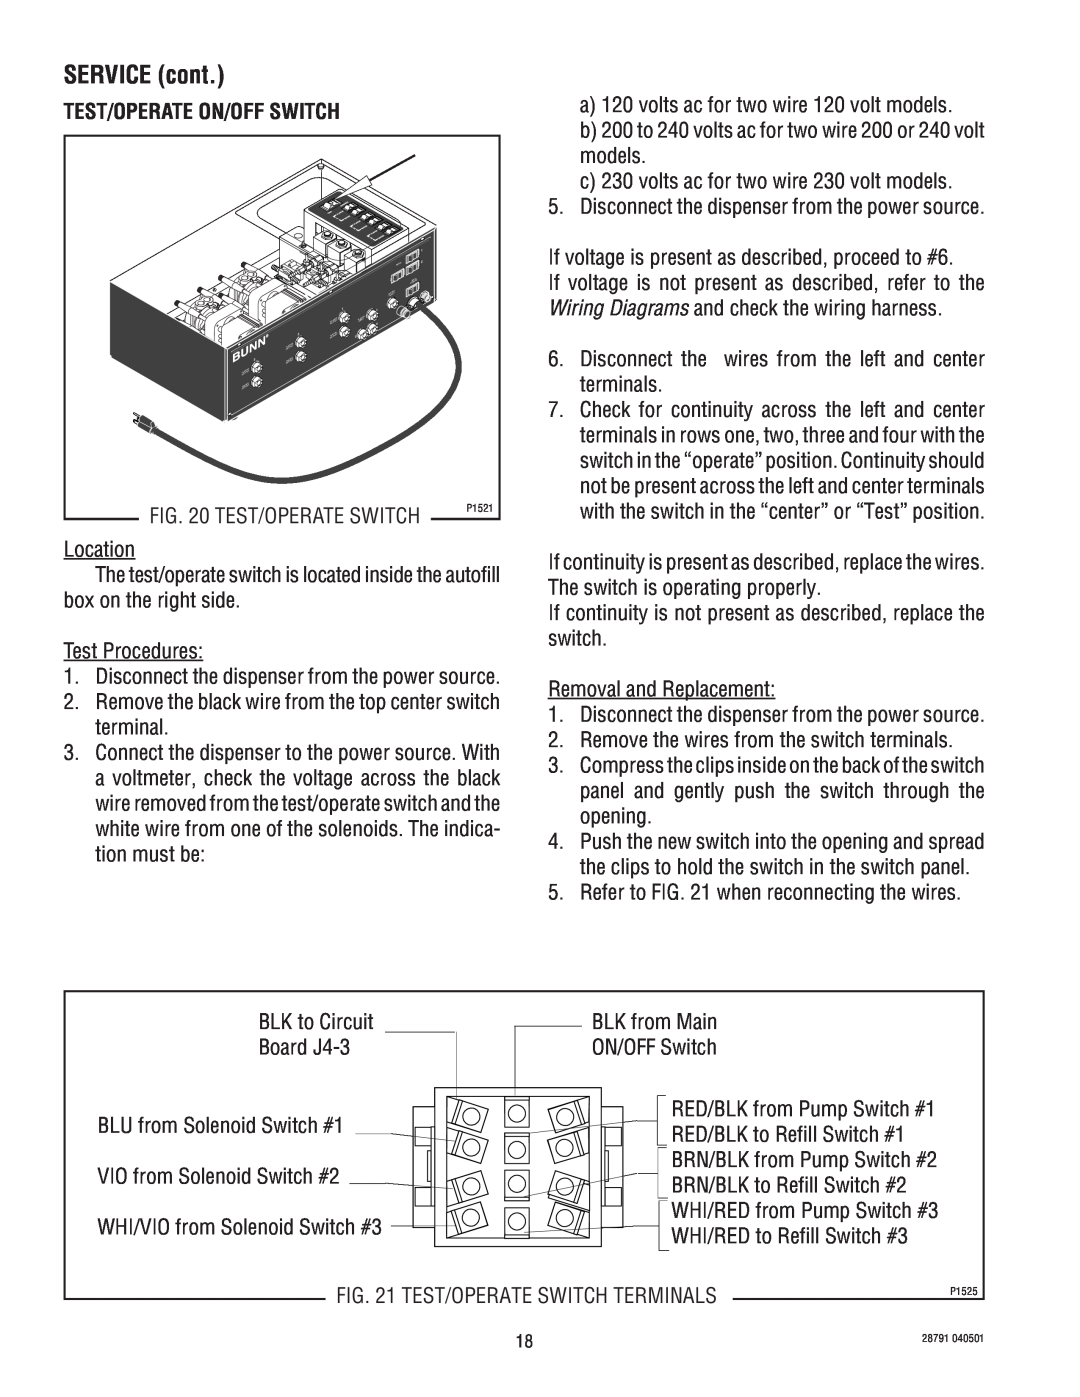 Bunn AFPO-3, AFPO-2 SL service manual SERVICE cont, Test/Operate Switch Terminals, Test/Operate On/Off Switch 